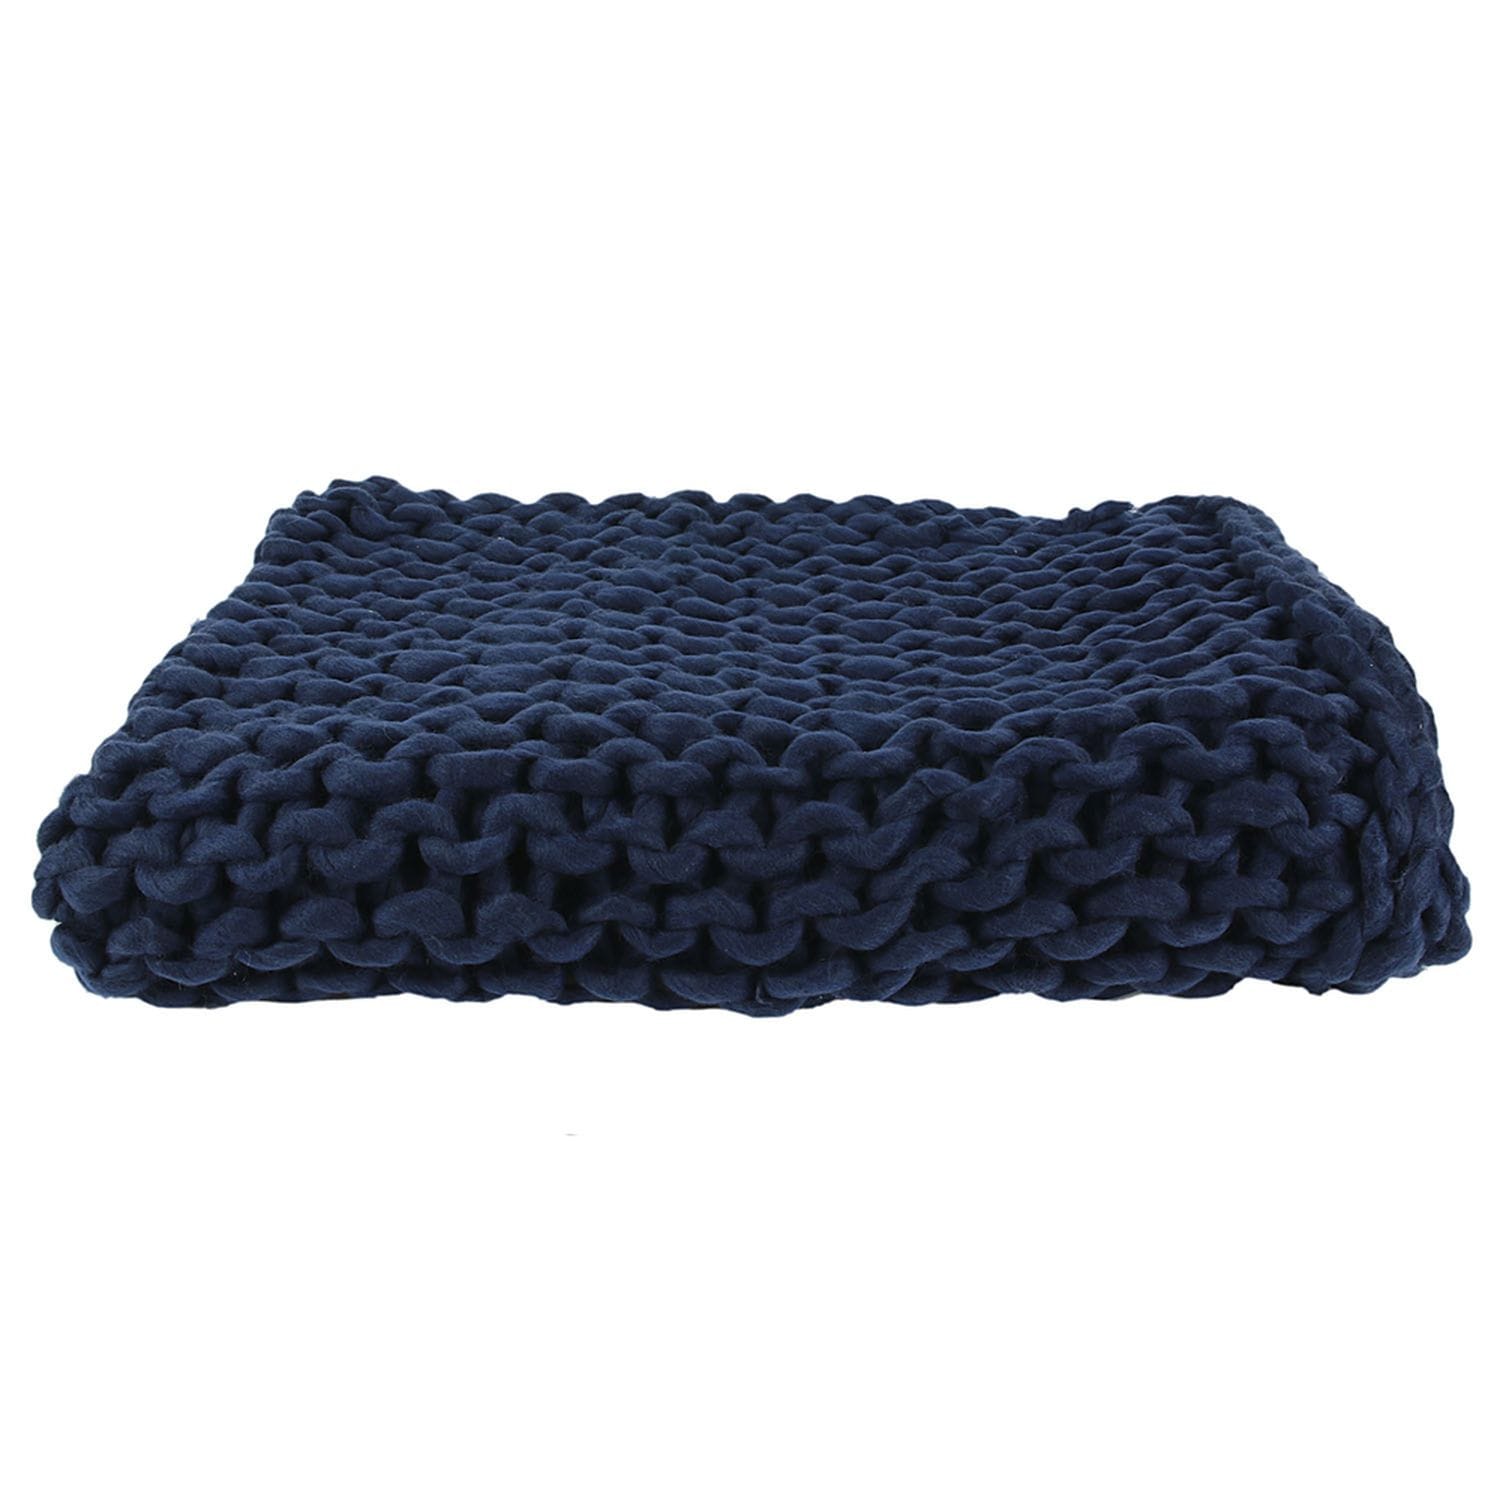 Plaid grosse maille chunky